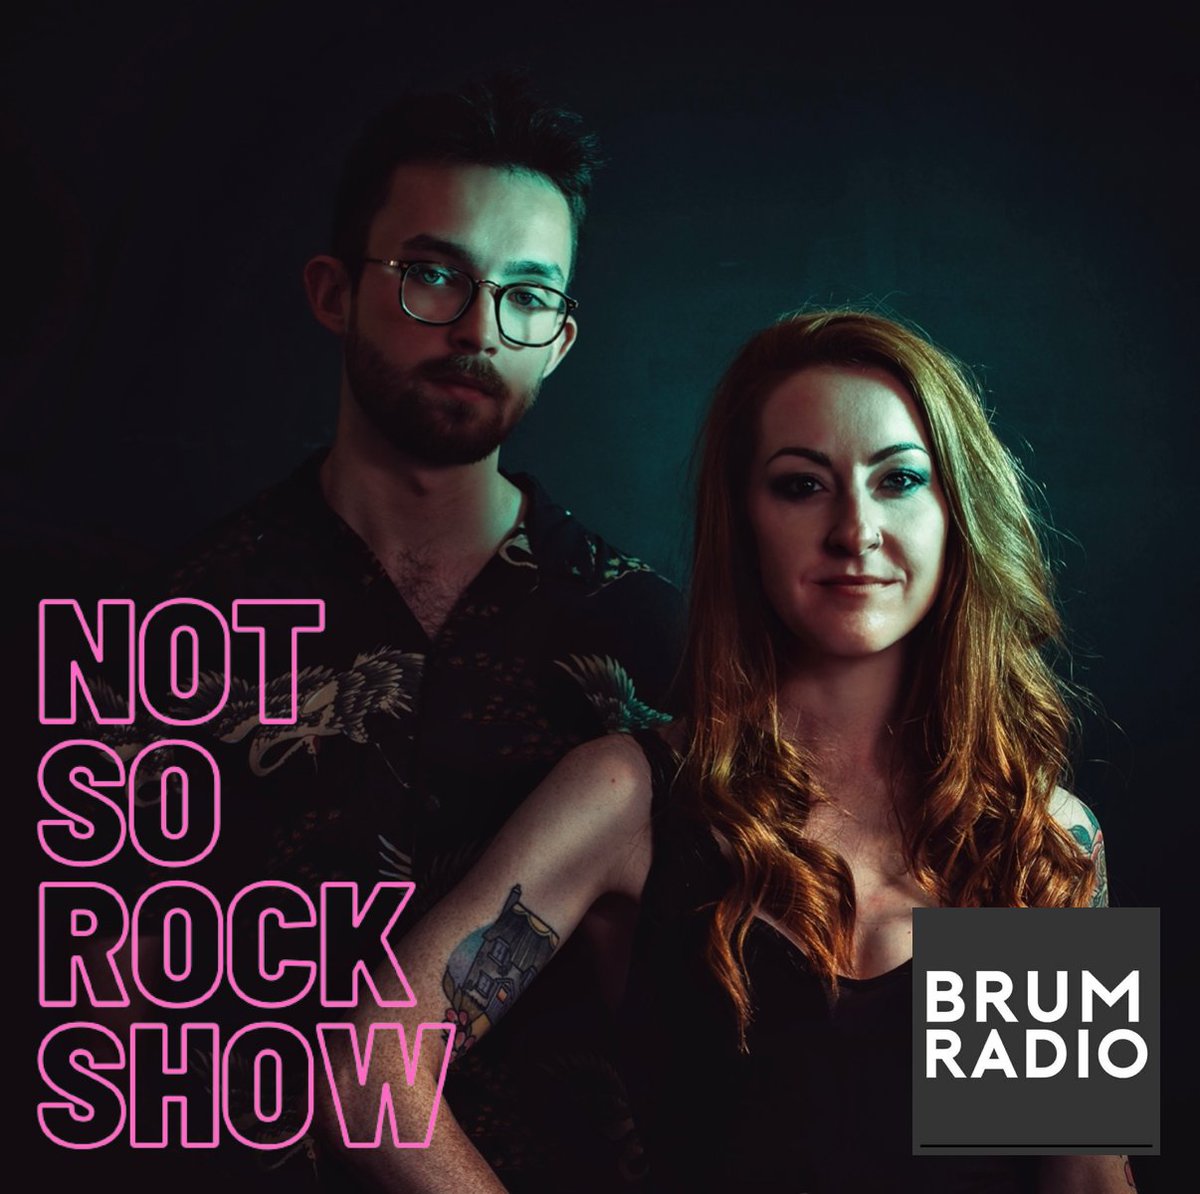 LIVE NOW >> The Not So Rock Show with Jenn & Pete

Listen live with @JennIsGreat & @producerpete_ Sundays at 2pm (UK Time) at brumradio.com
#InBrumWeTrust #Birmingham